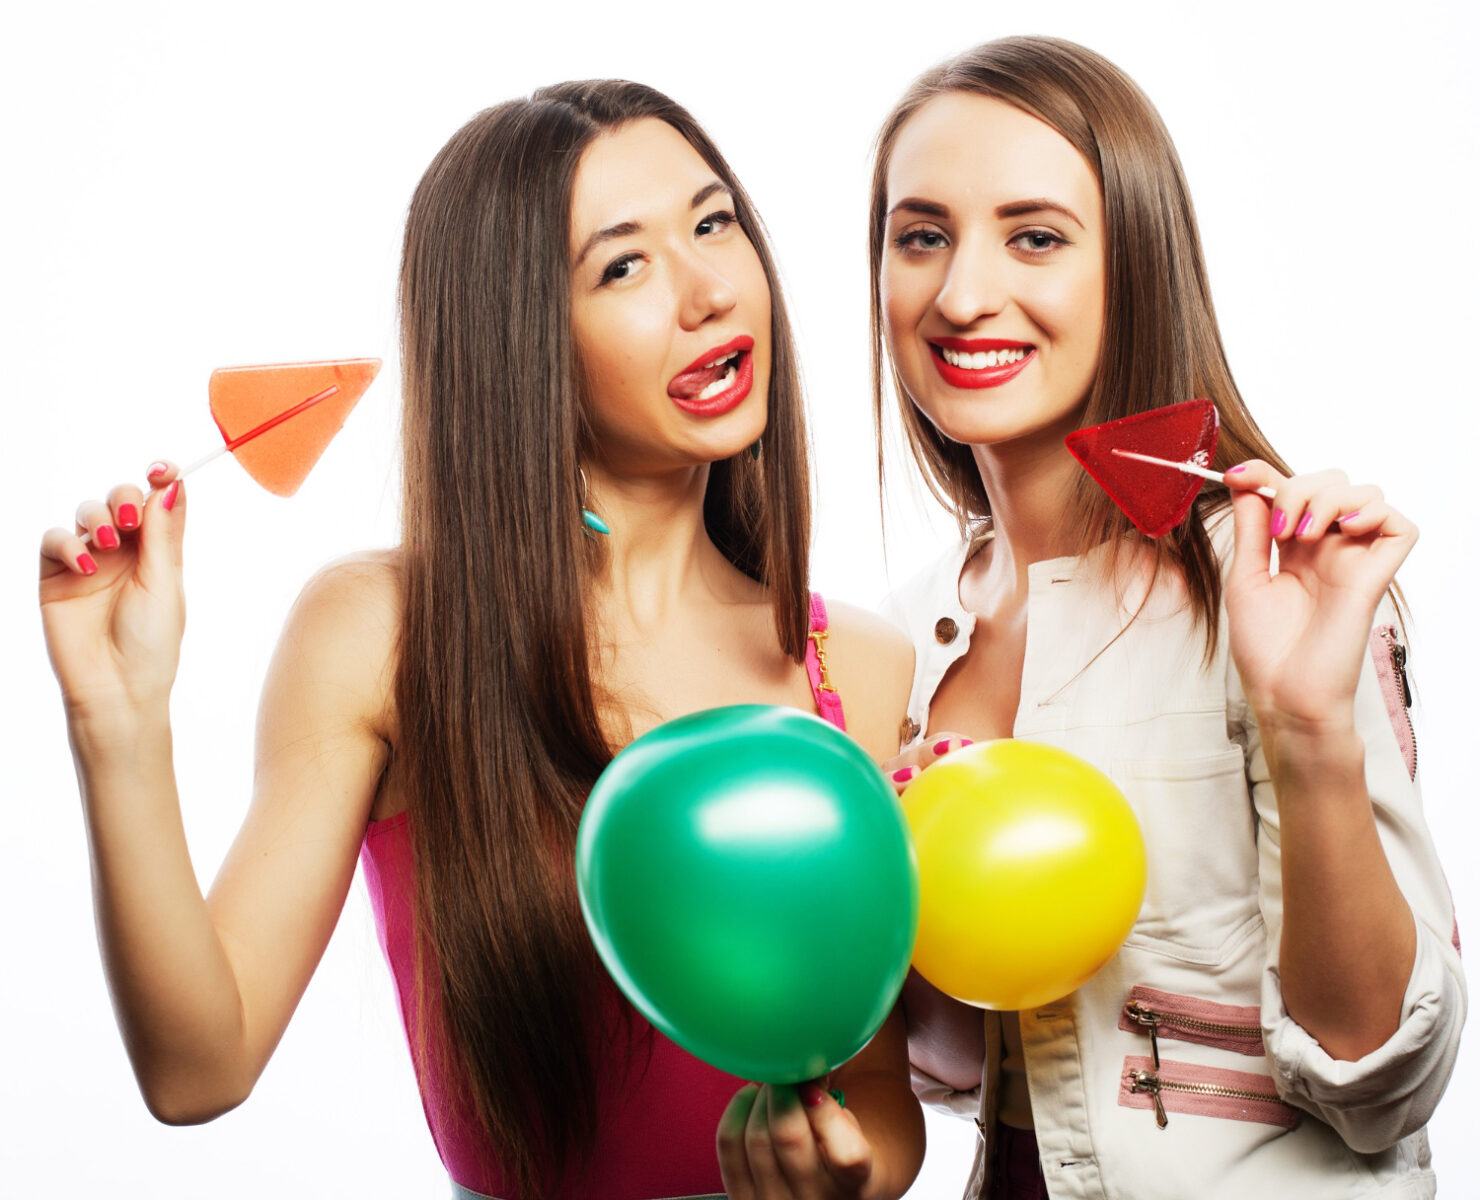 two happy girls smiling holding colored balloons and candy